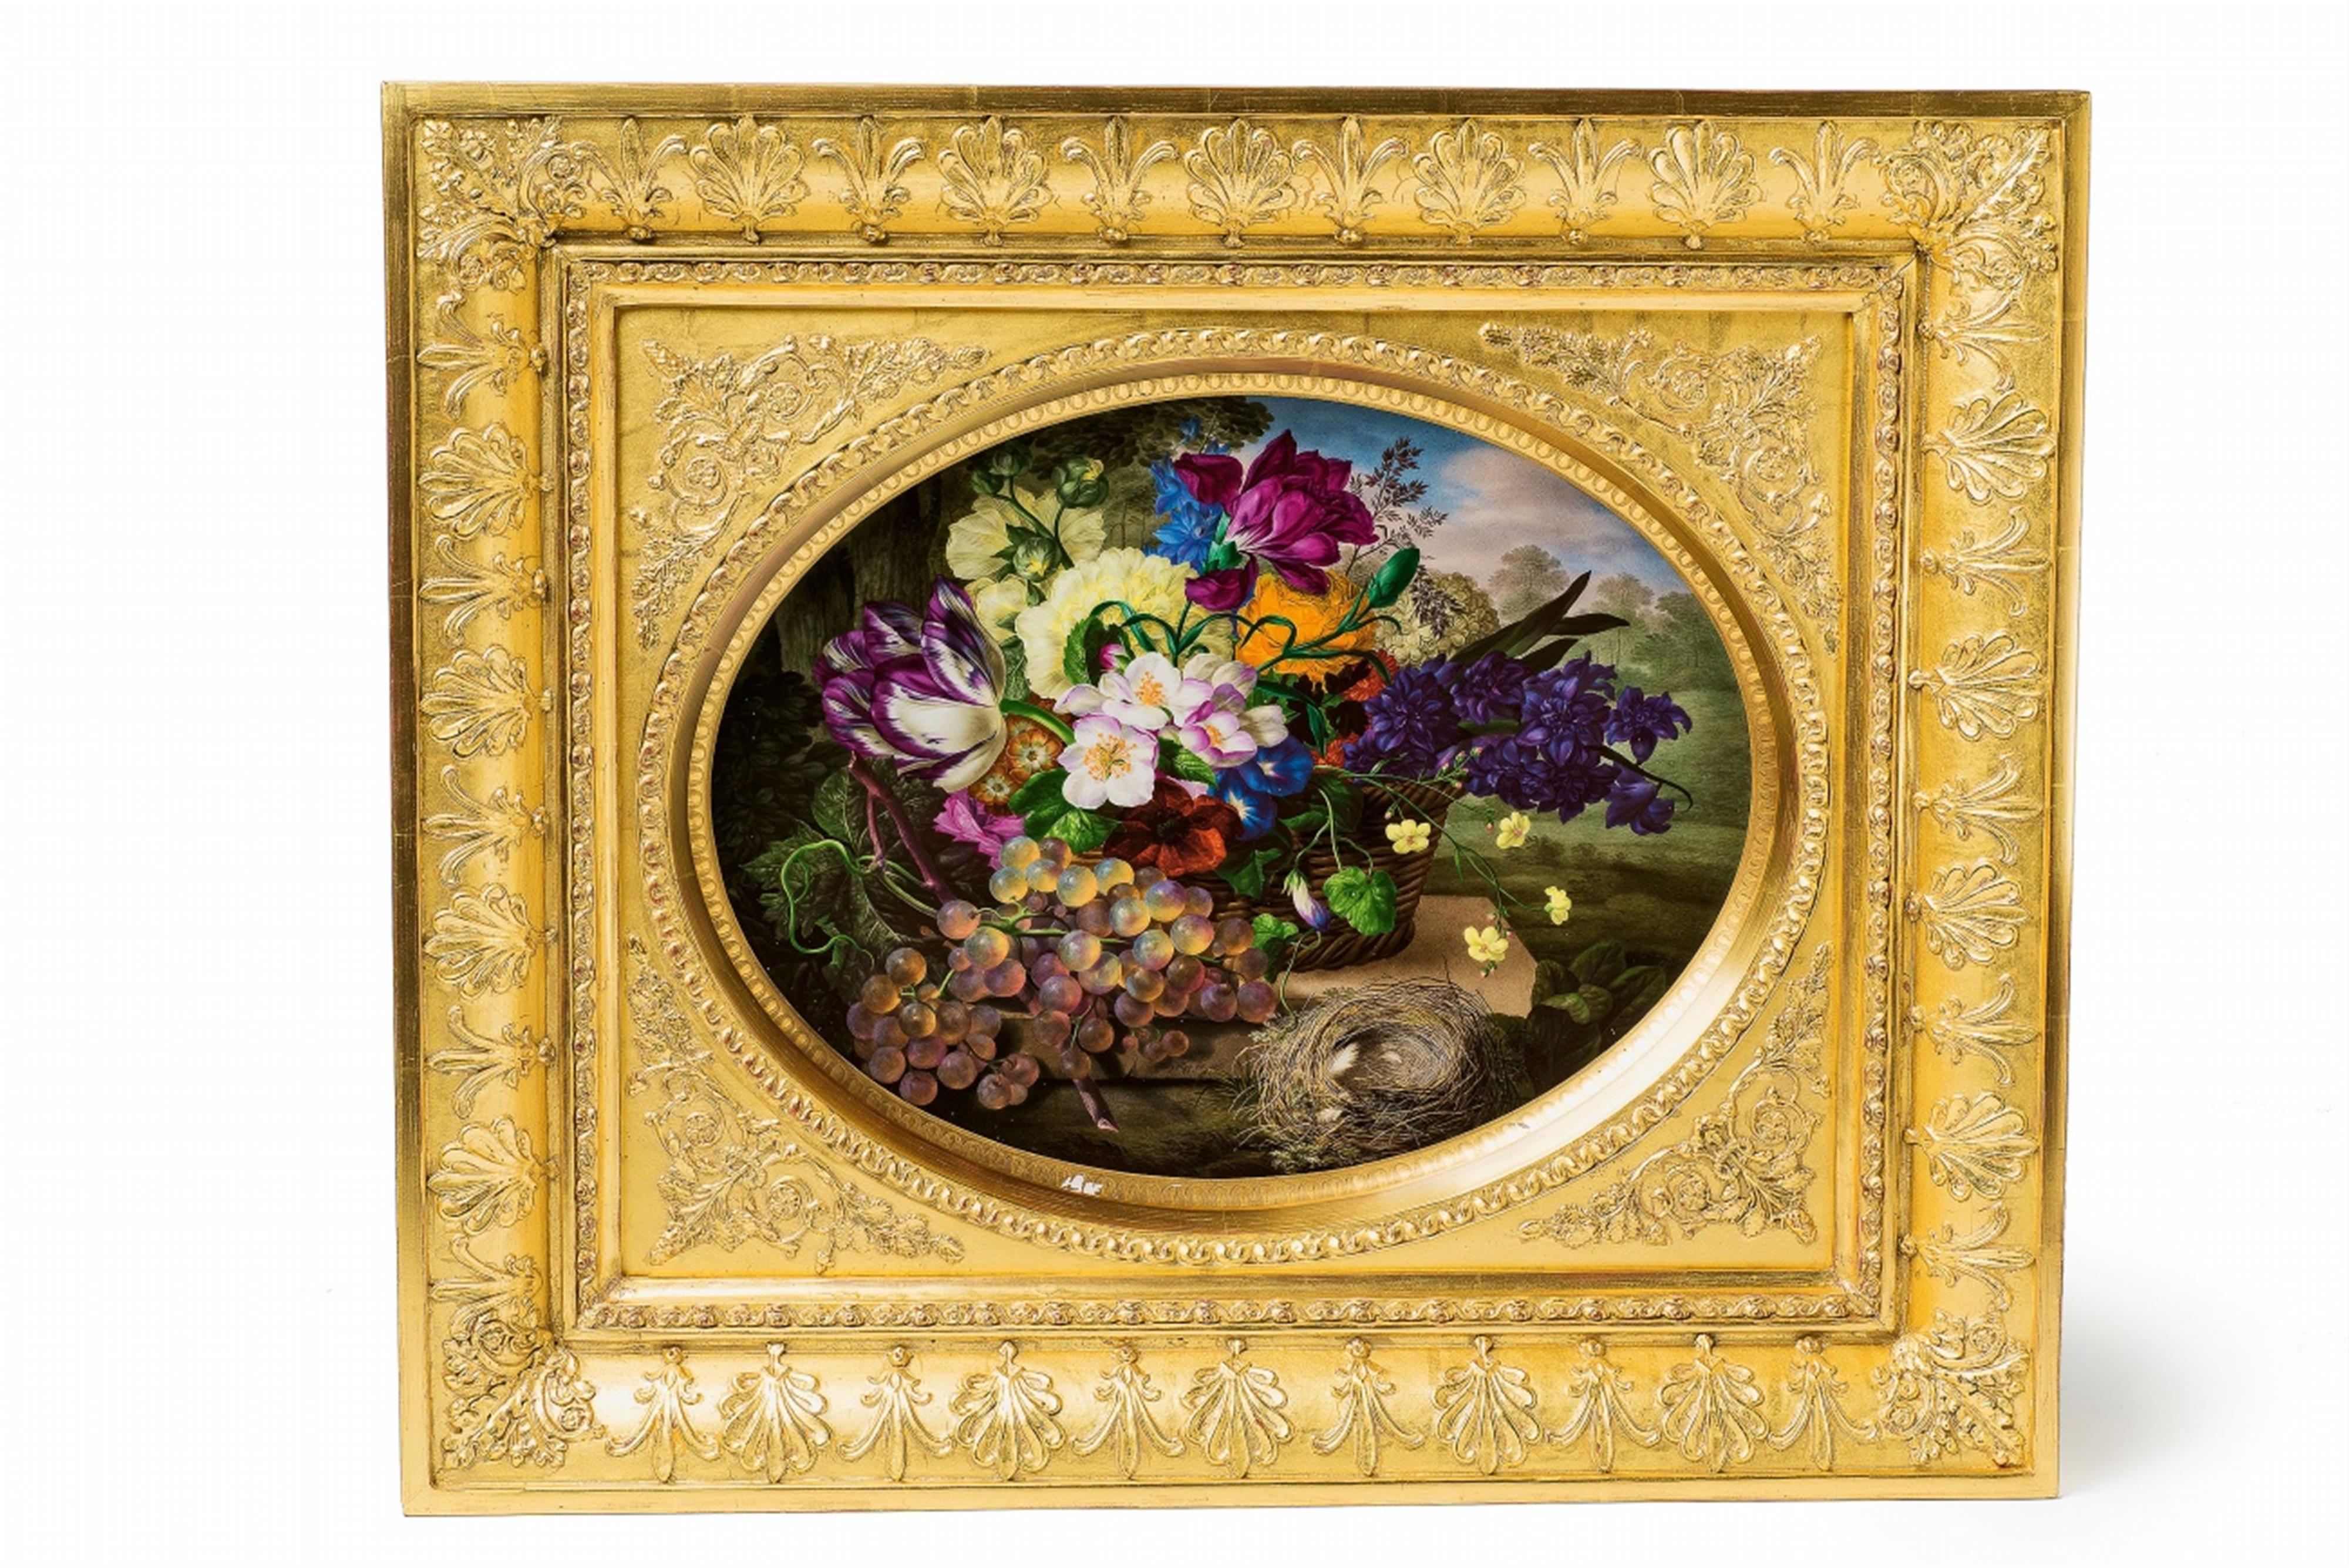 A Vienna porcelain tray with a basket of flowers, grapes, and a bird's nest - image-4